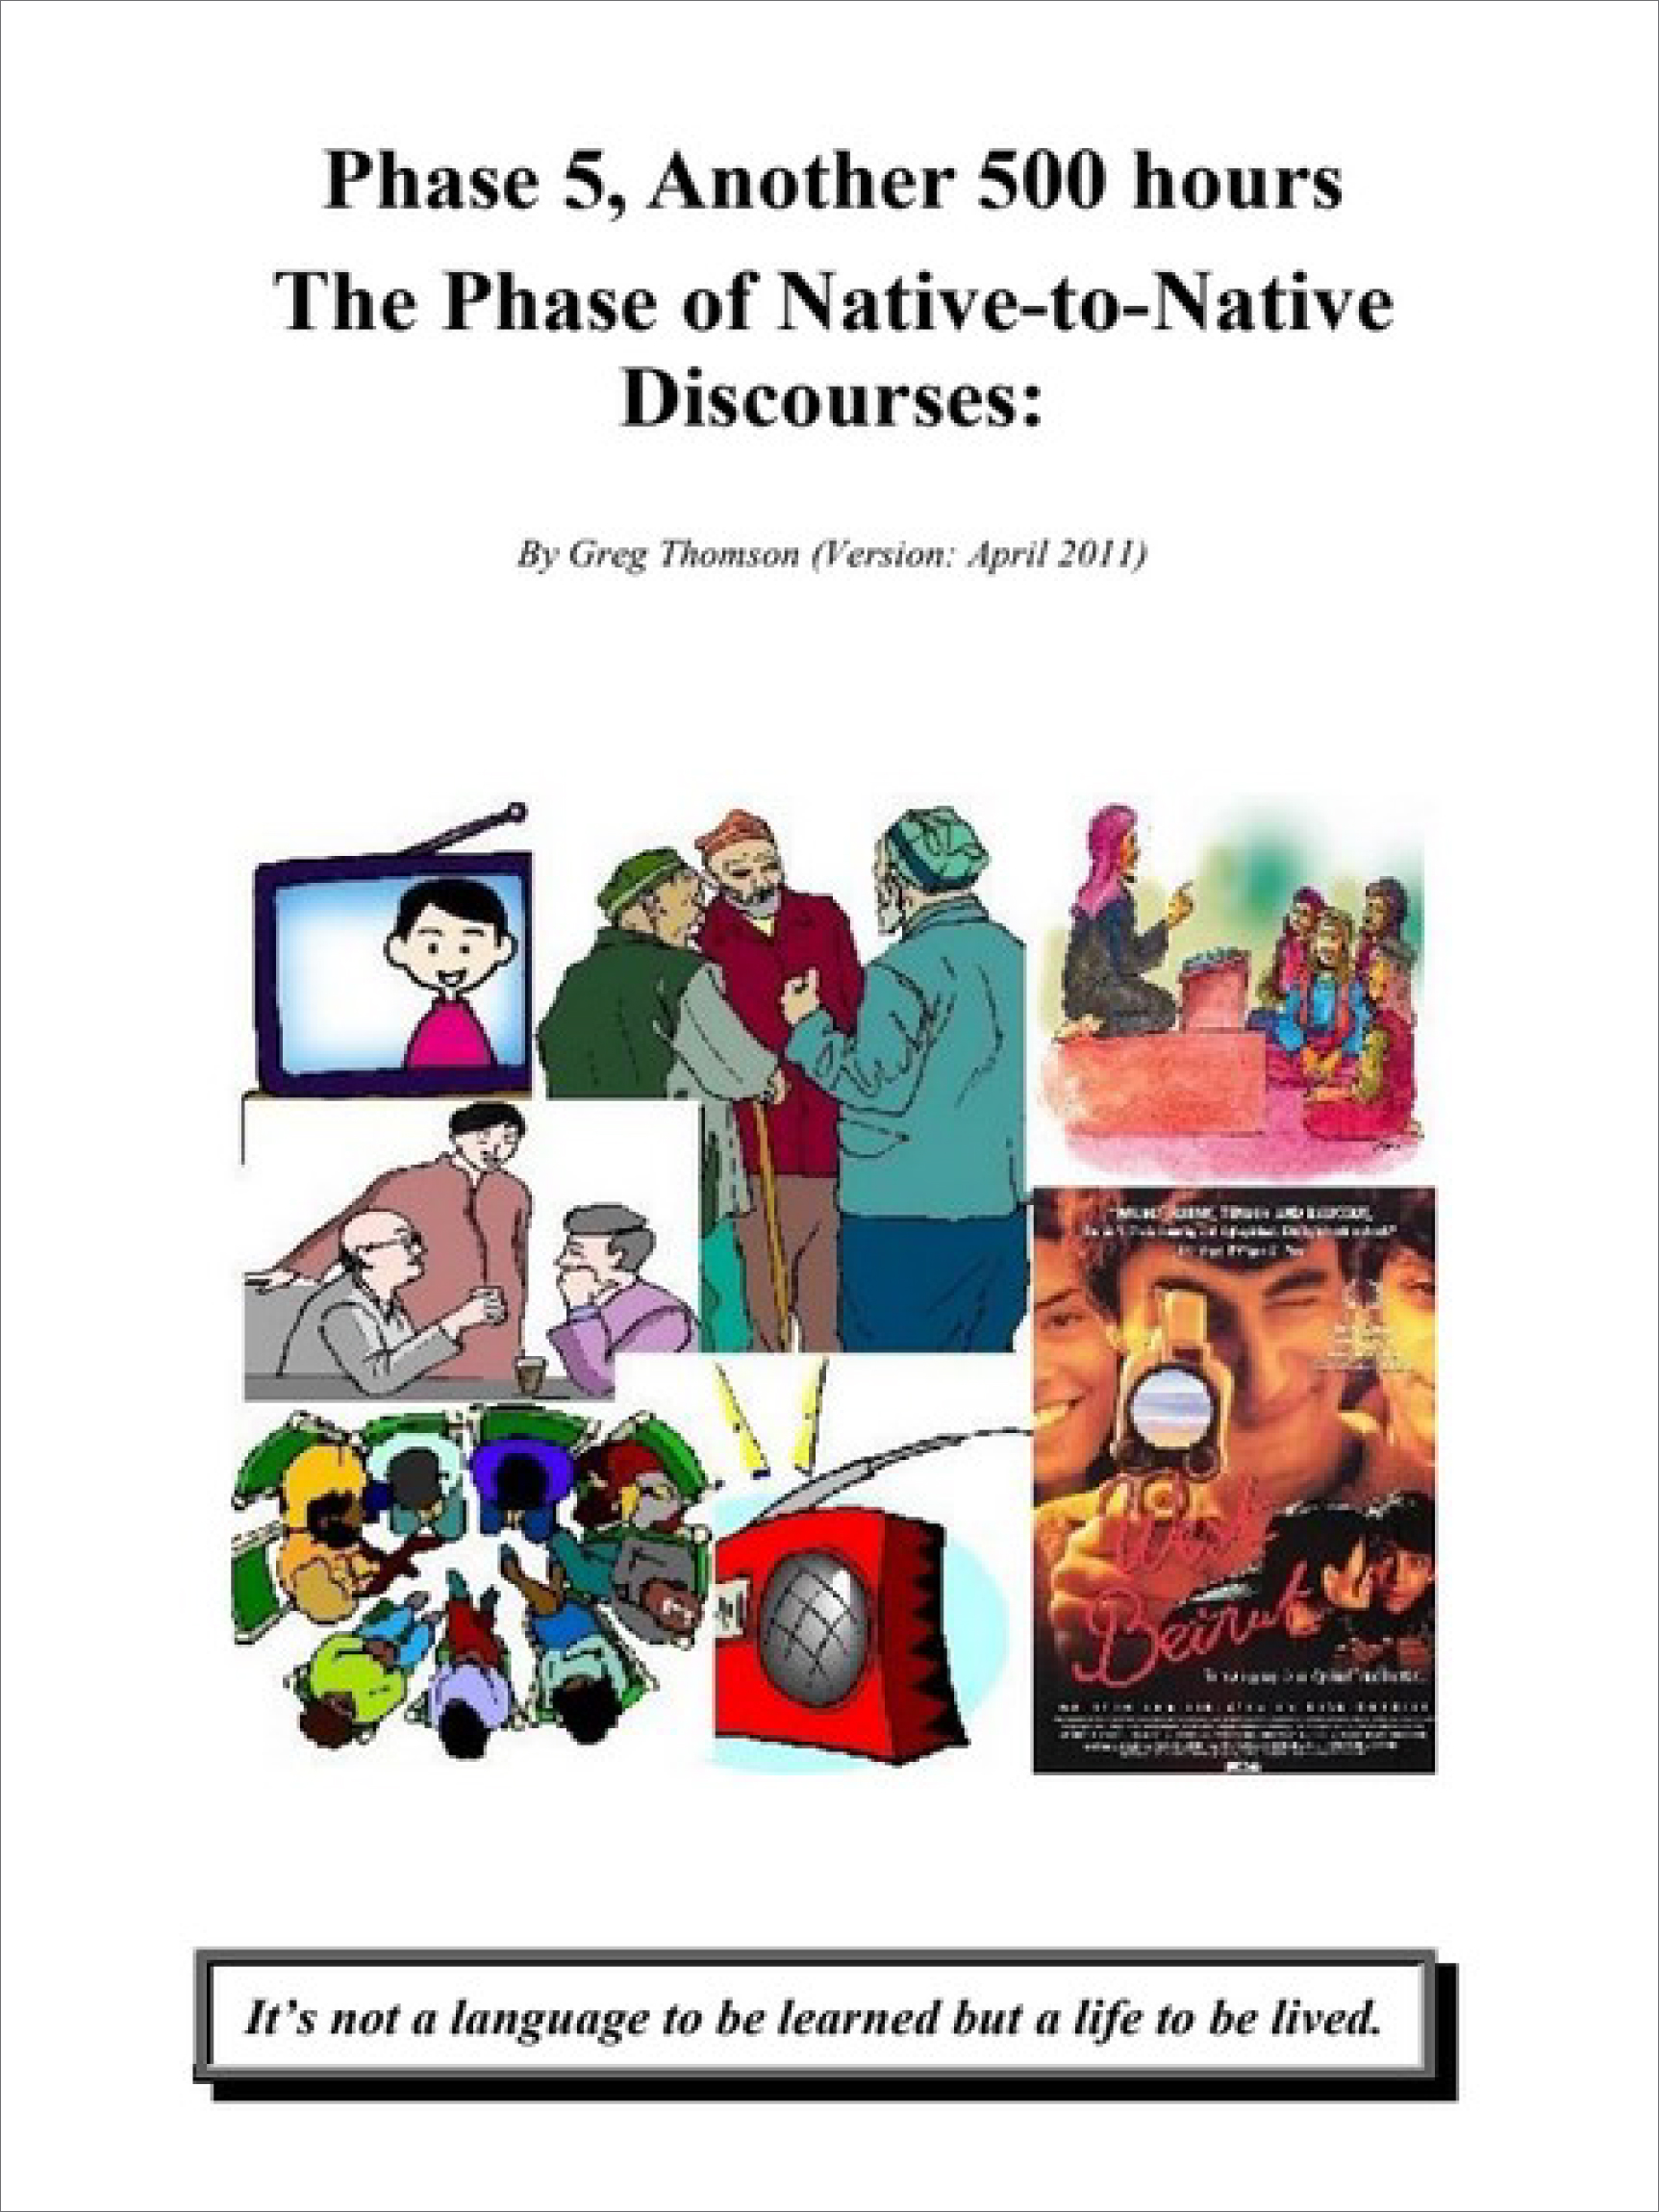 Phase 5, Another 500 hours The Phase of Native-to-Native Discourses: